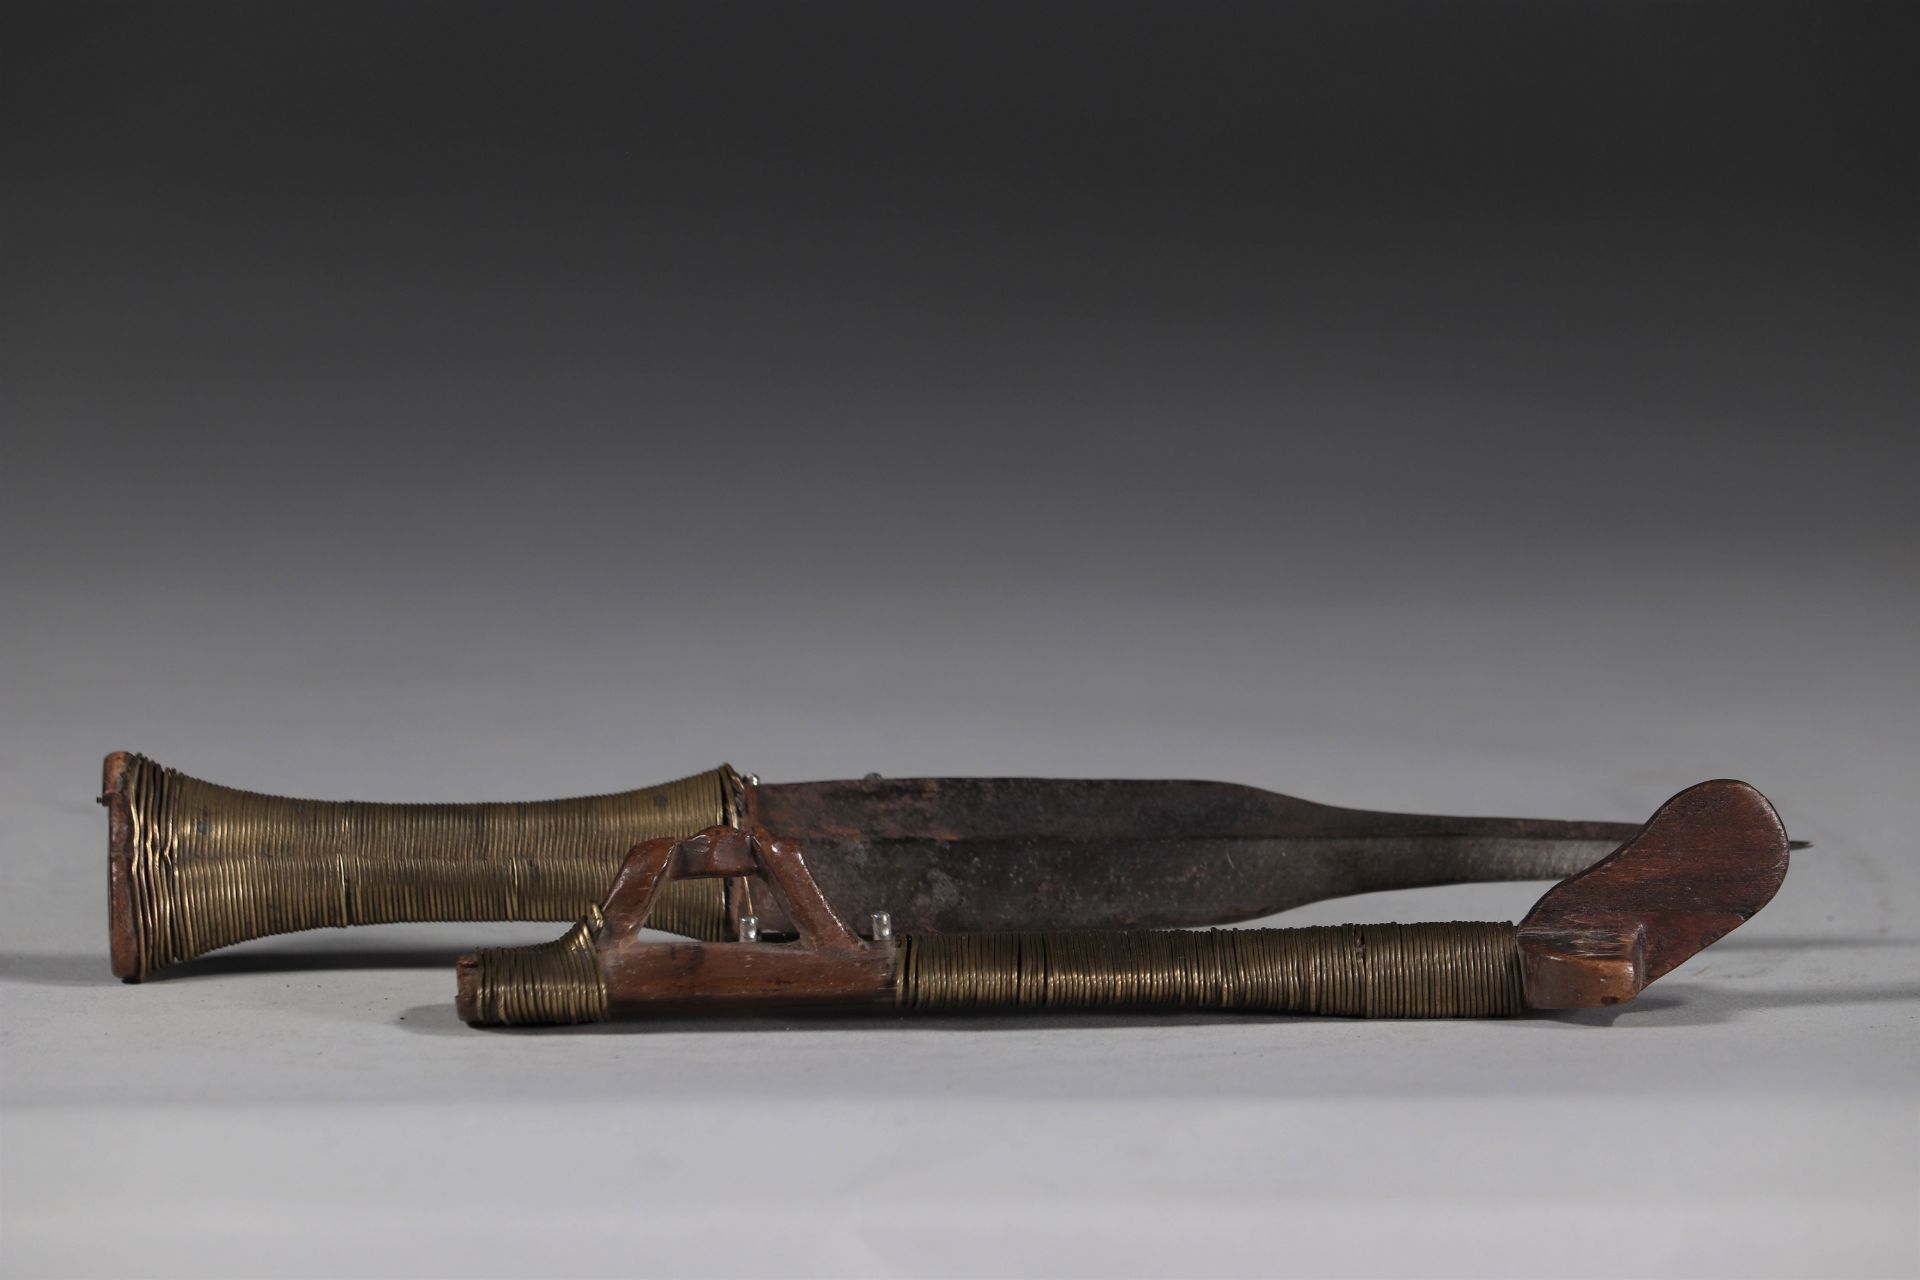 Shona knife South Africa early 20th century - Image 3 of 3